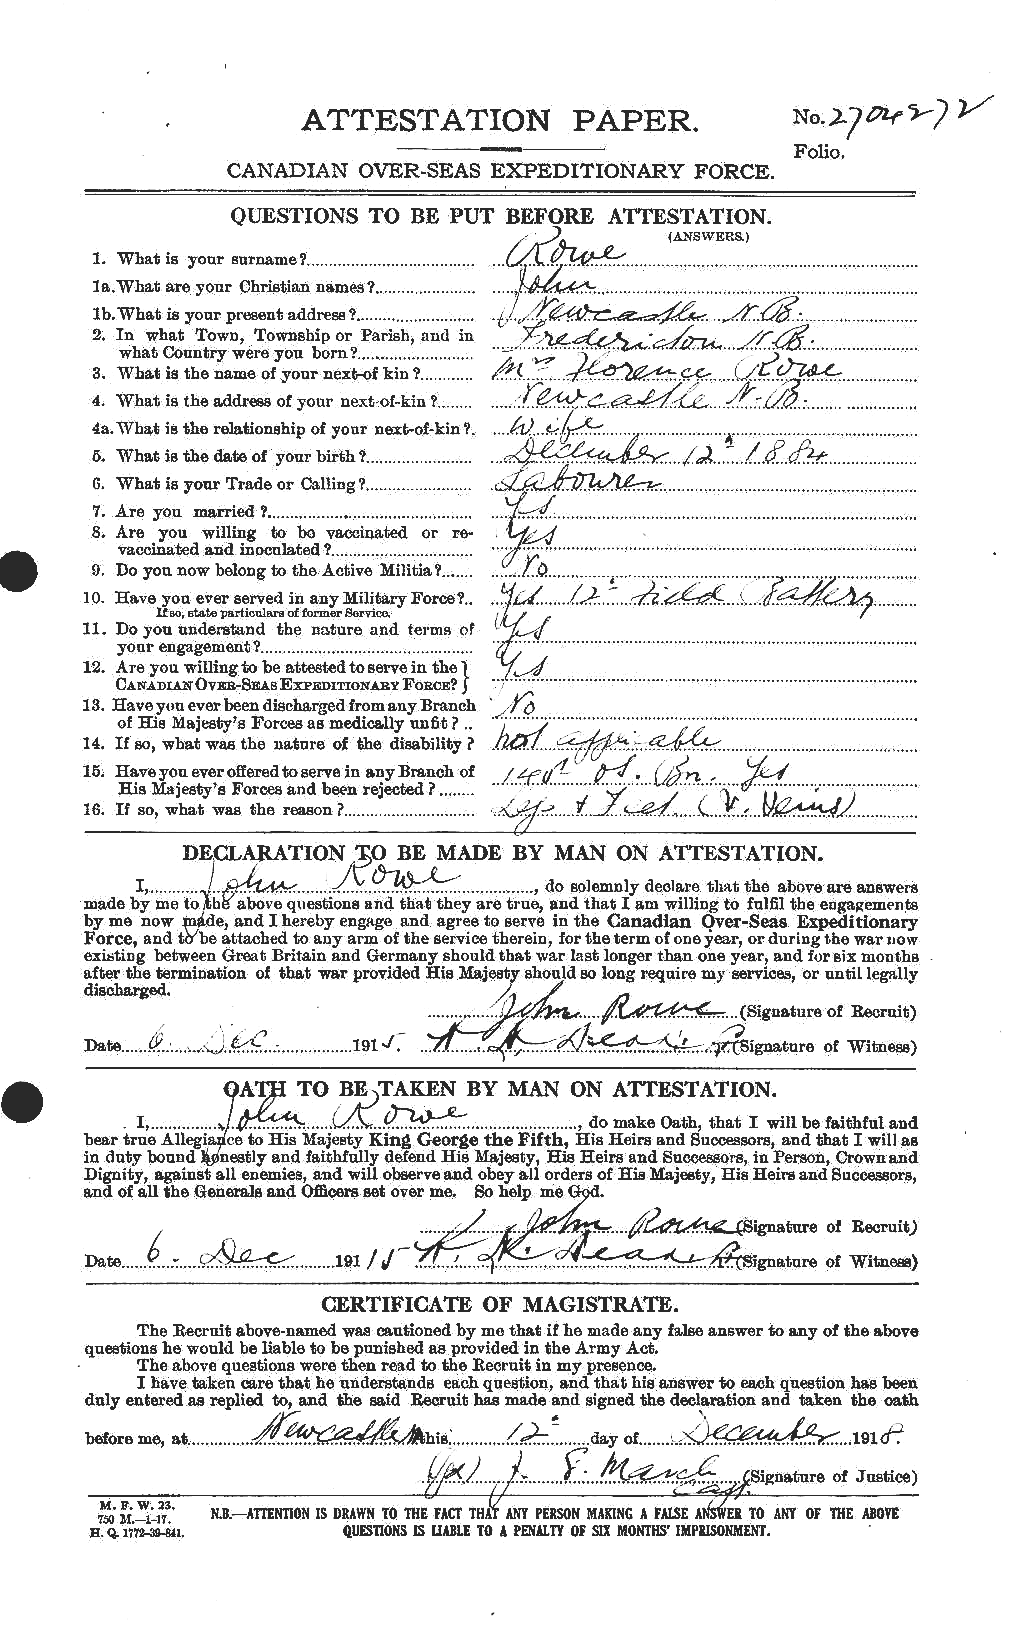 Personnel Records of the First World War - CEF 615923a